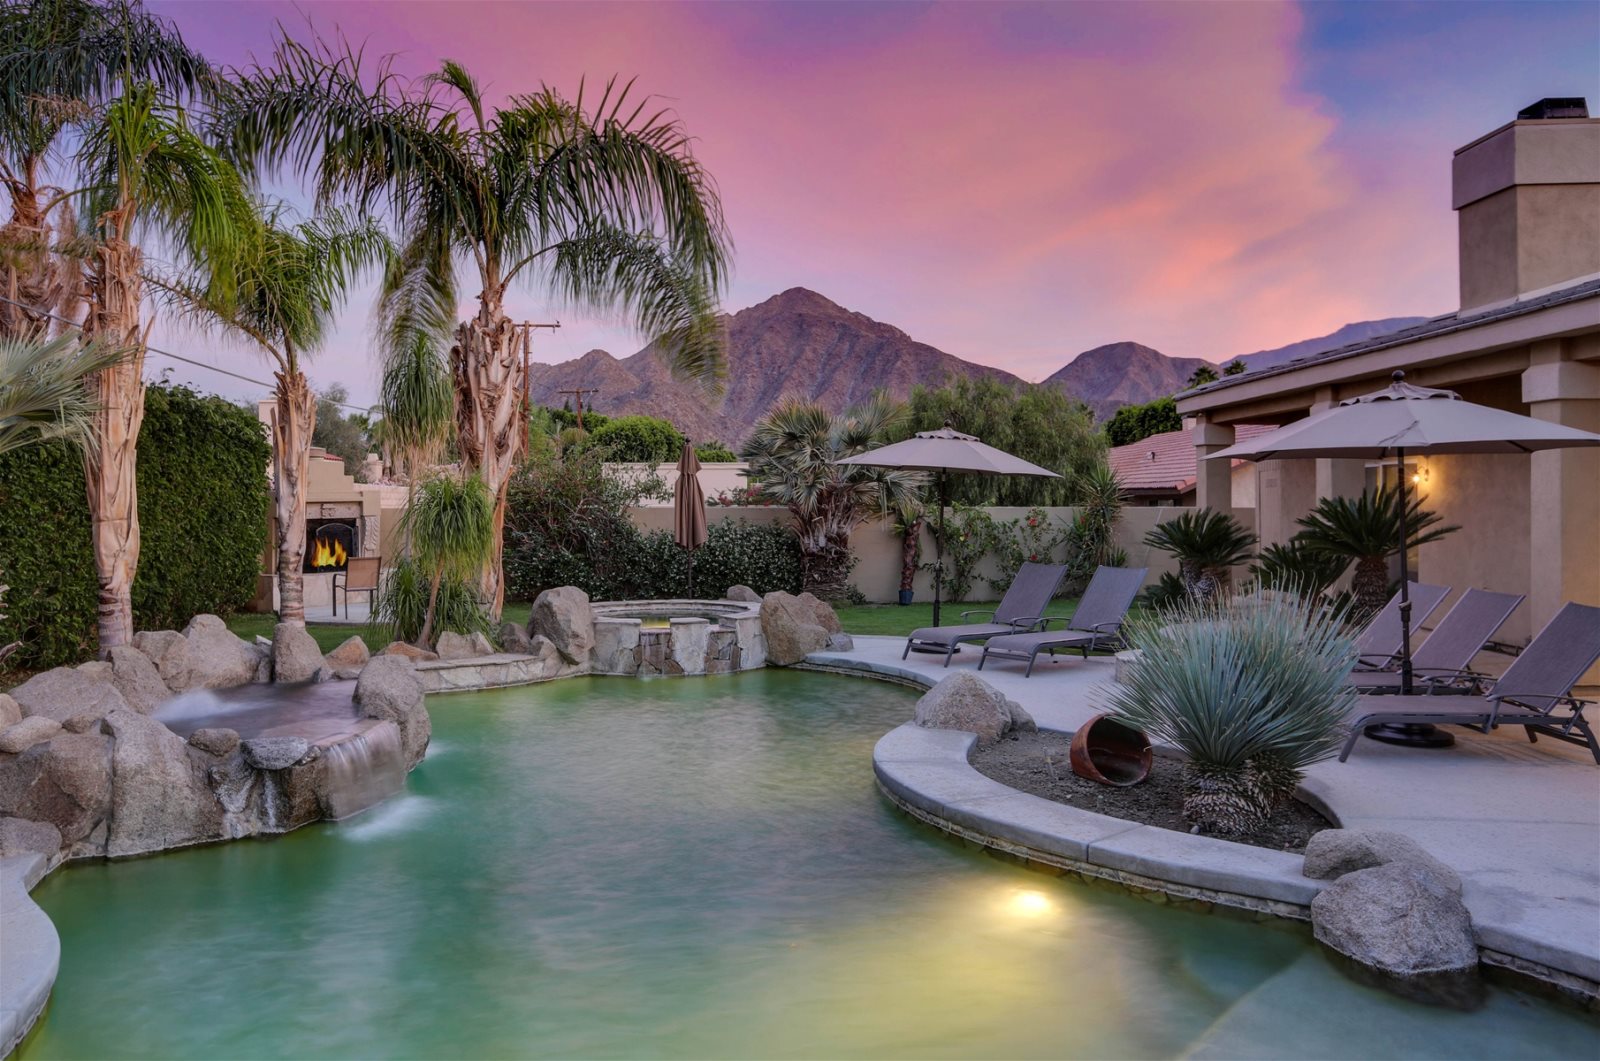 La Quinta Vacation Home Rental with Private Pool and Spa